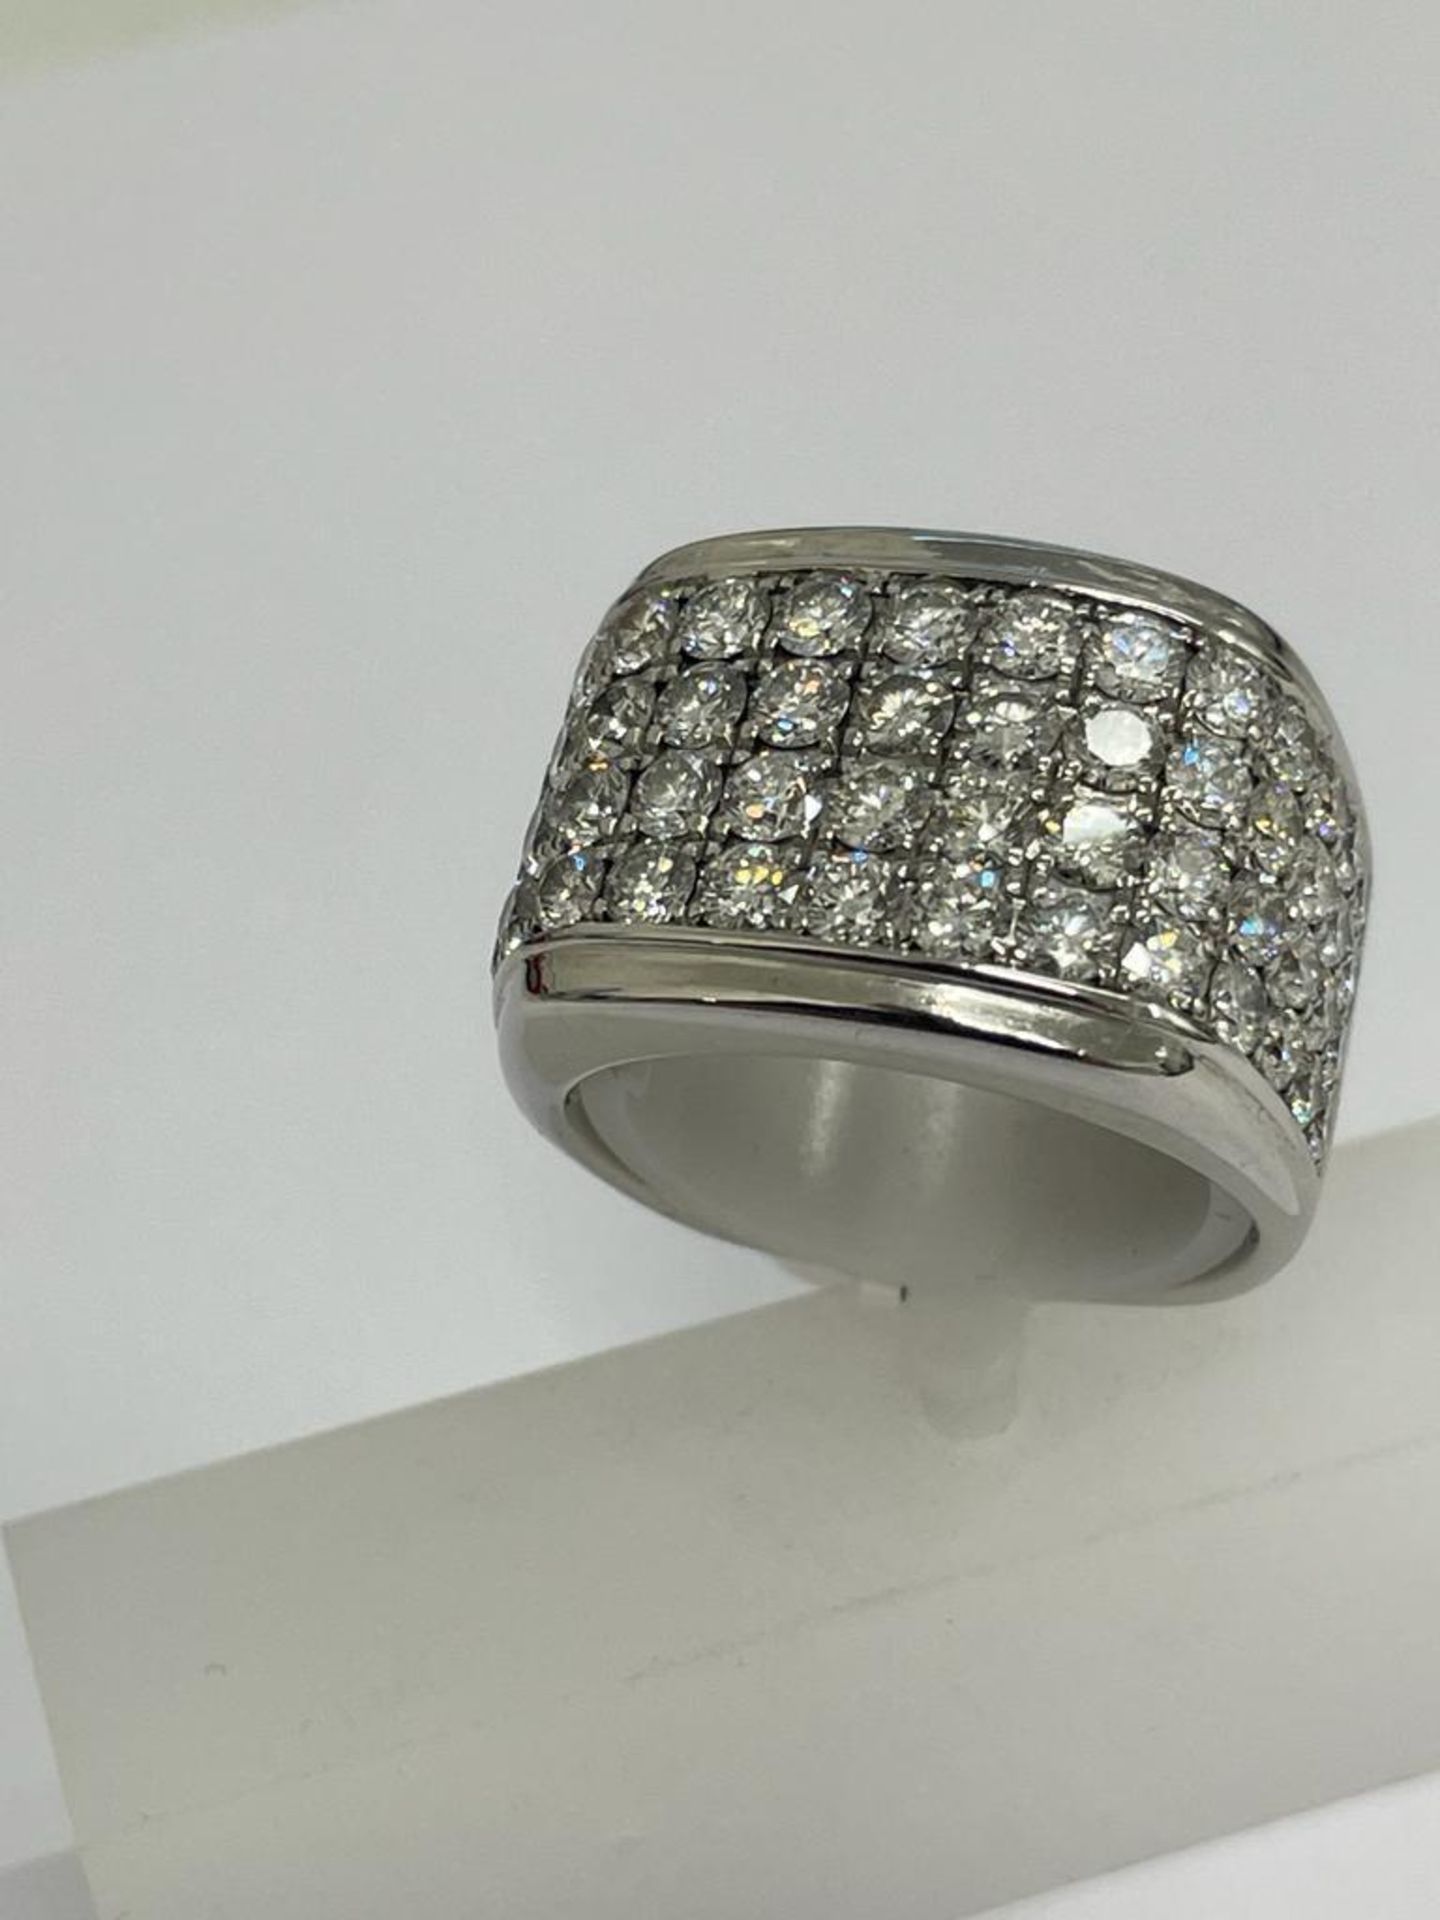 A GENTLEMAN'S 14 CARAT WHITE GOLD RING SET WITH APPROXIMATELY 5 CARATS OF BRILLIANT CUT DIAMONDS, - Image 6 of 8